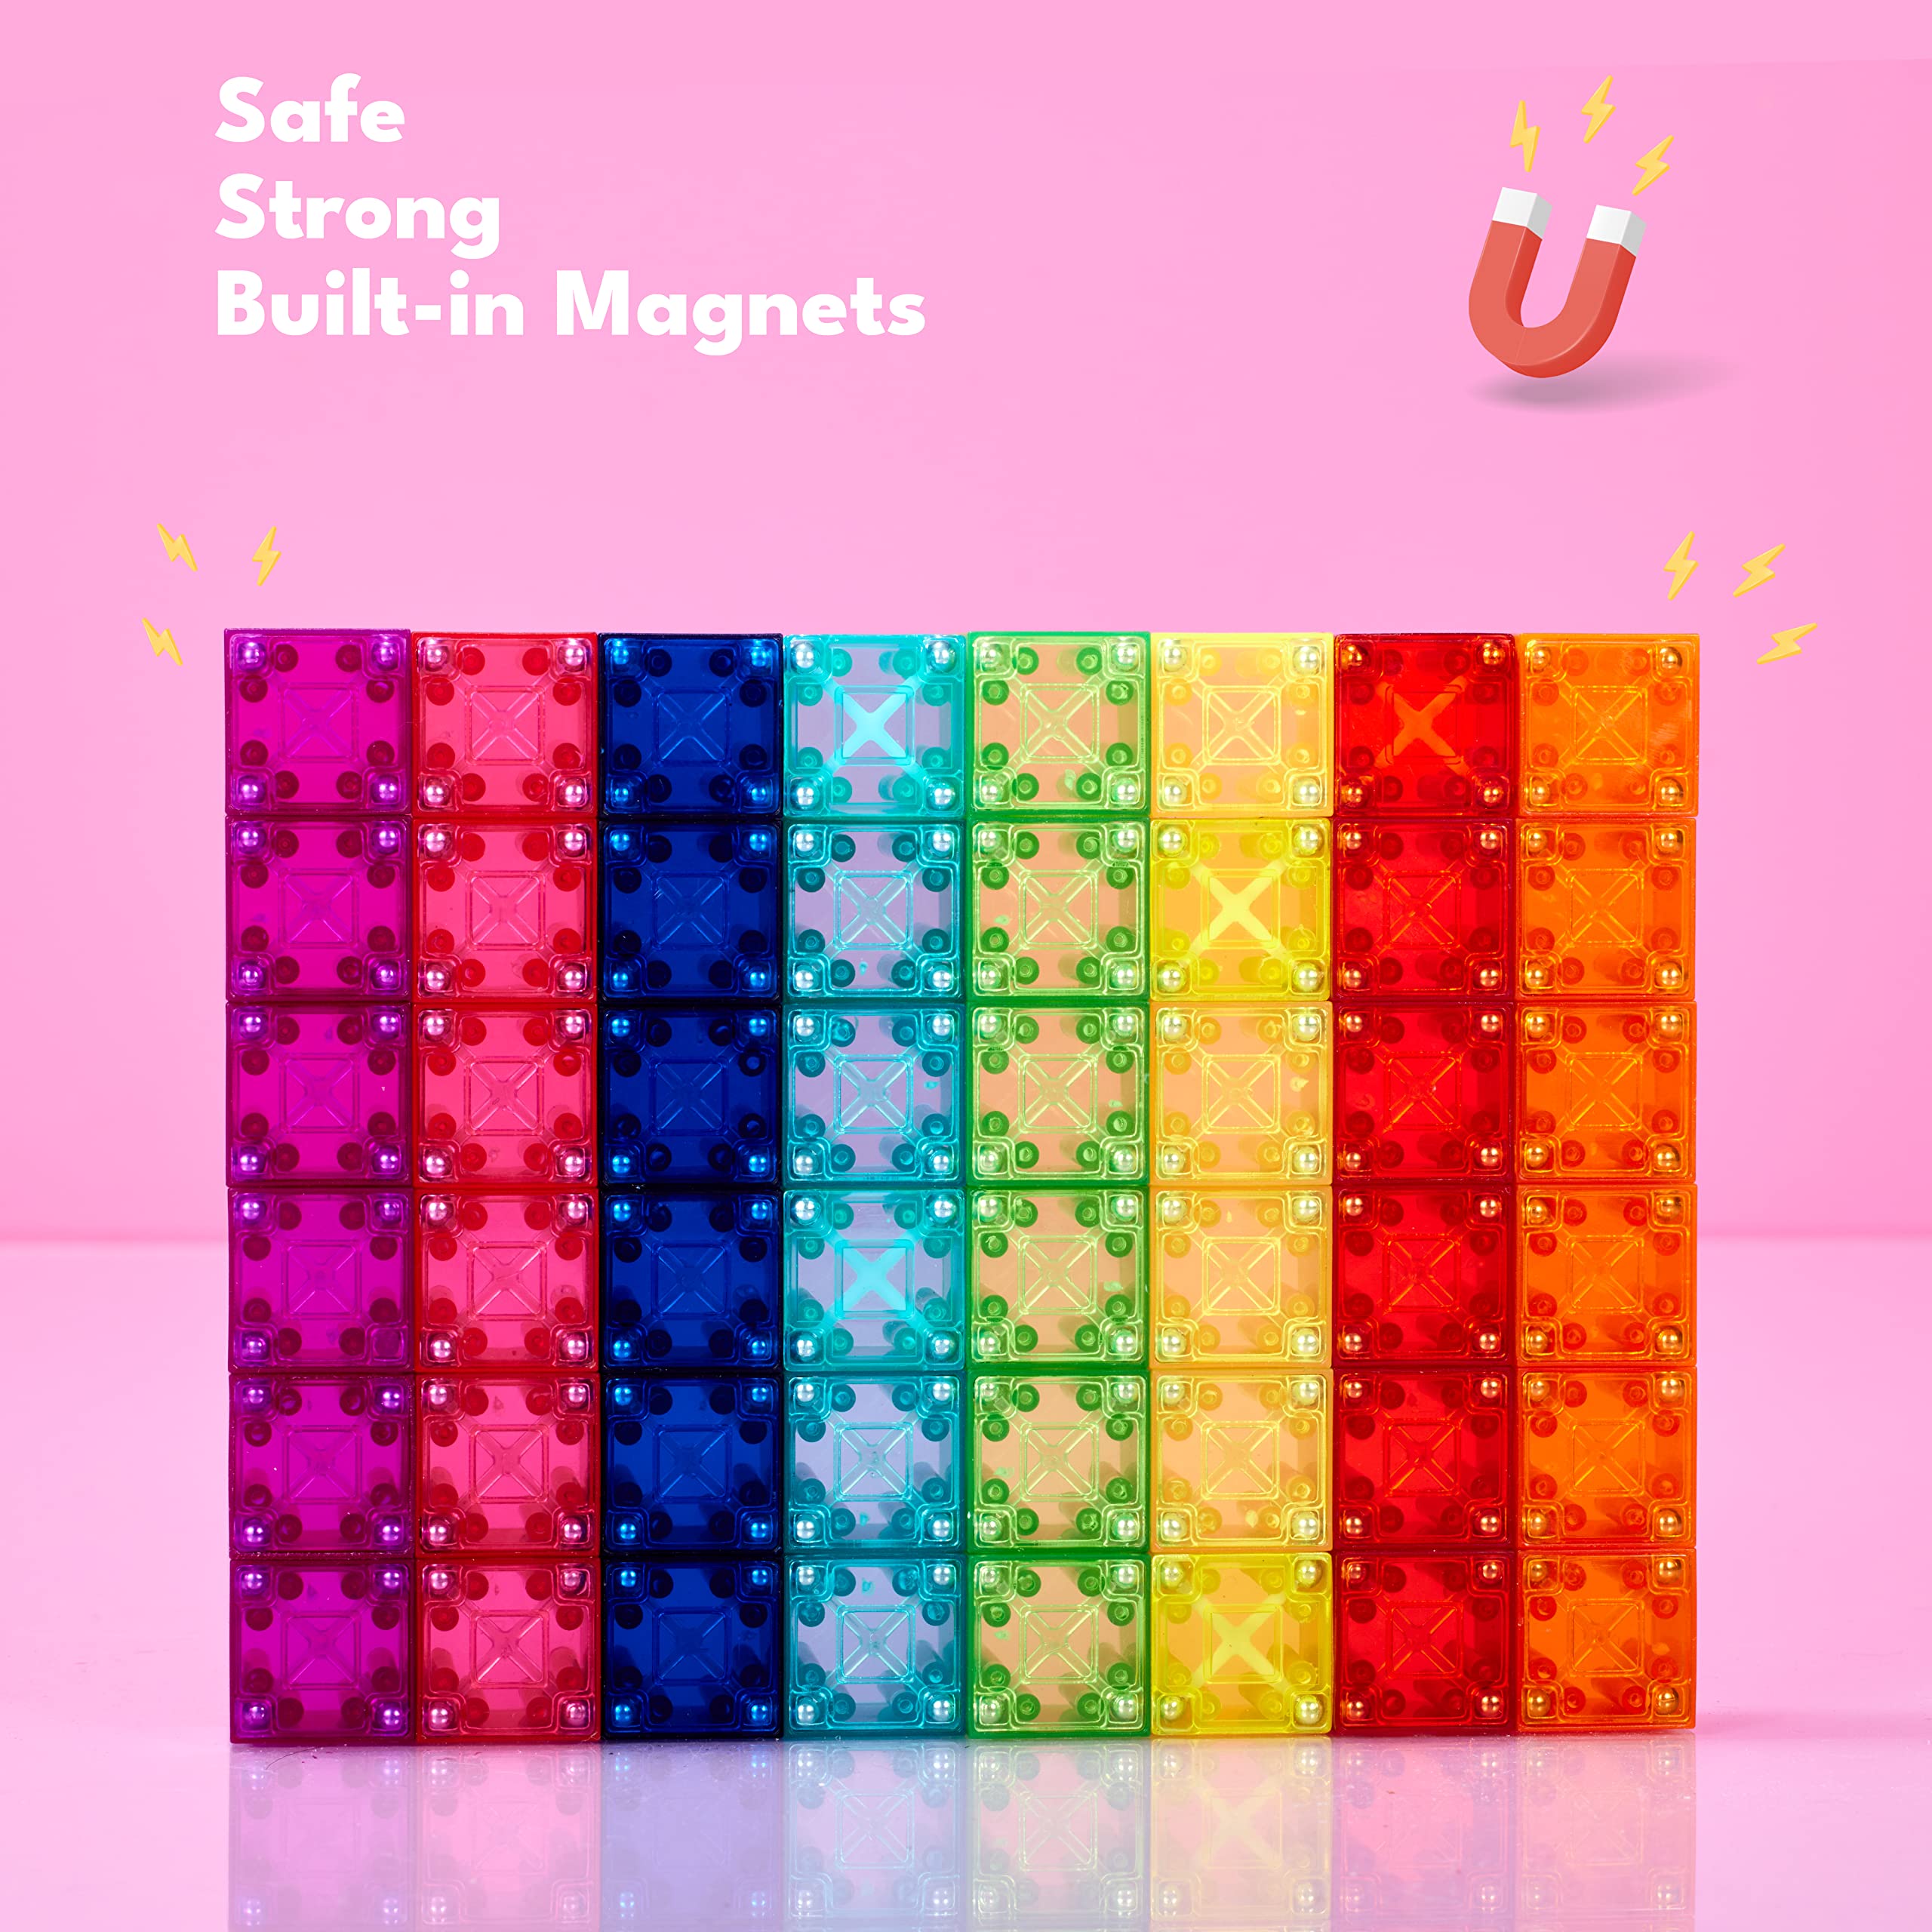 BrainSpark Translucent Digit Blocks 48 Pieces Magnetic Building Blocks, Montessori Clear Magnet Cubes for Boys and Girls Stacking Sets